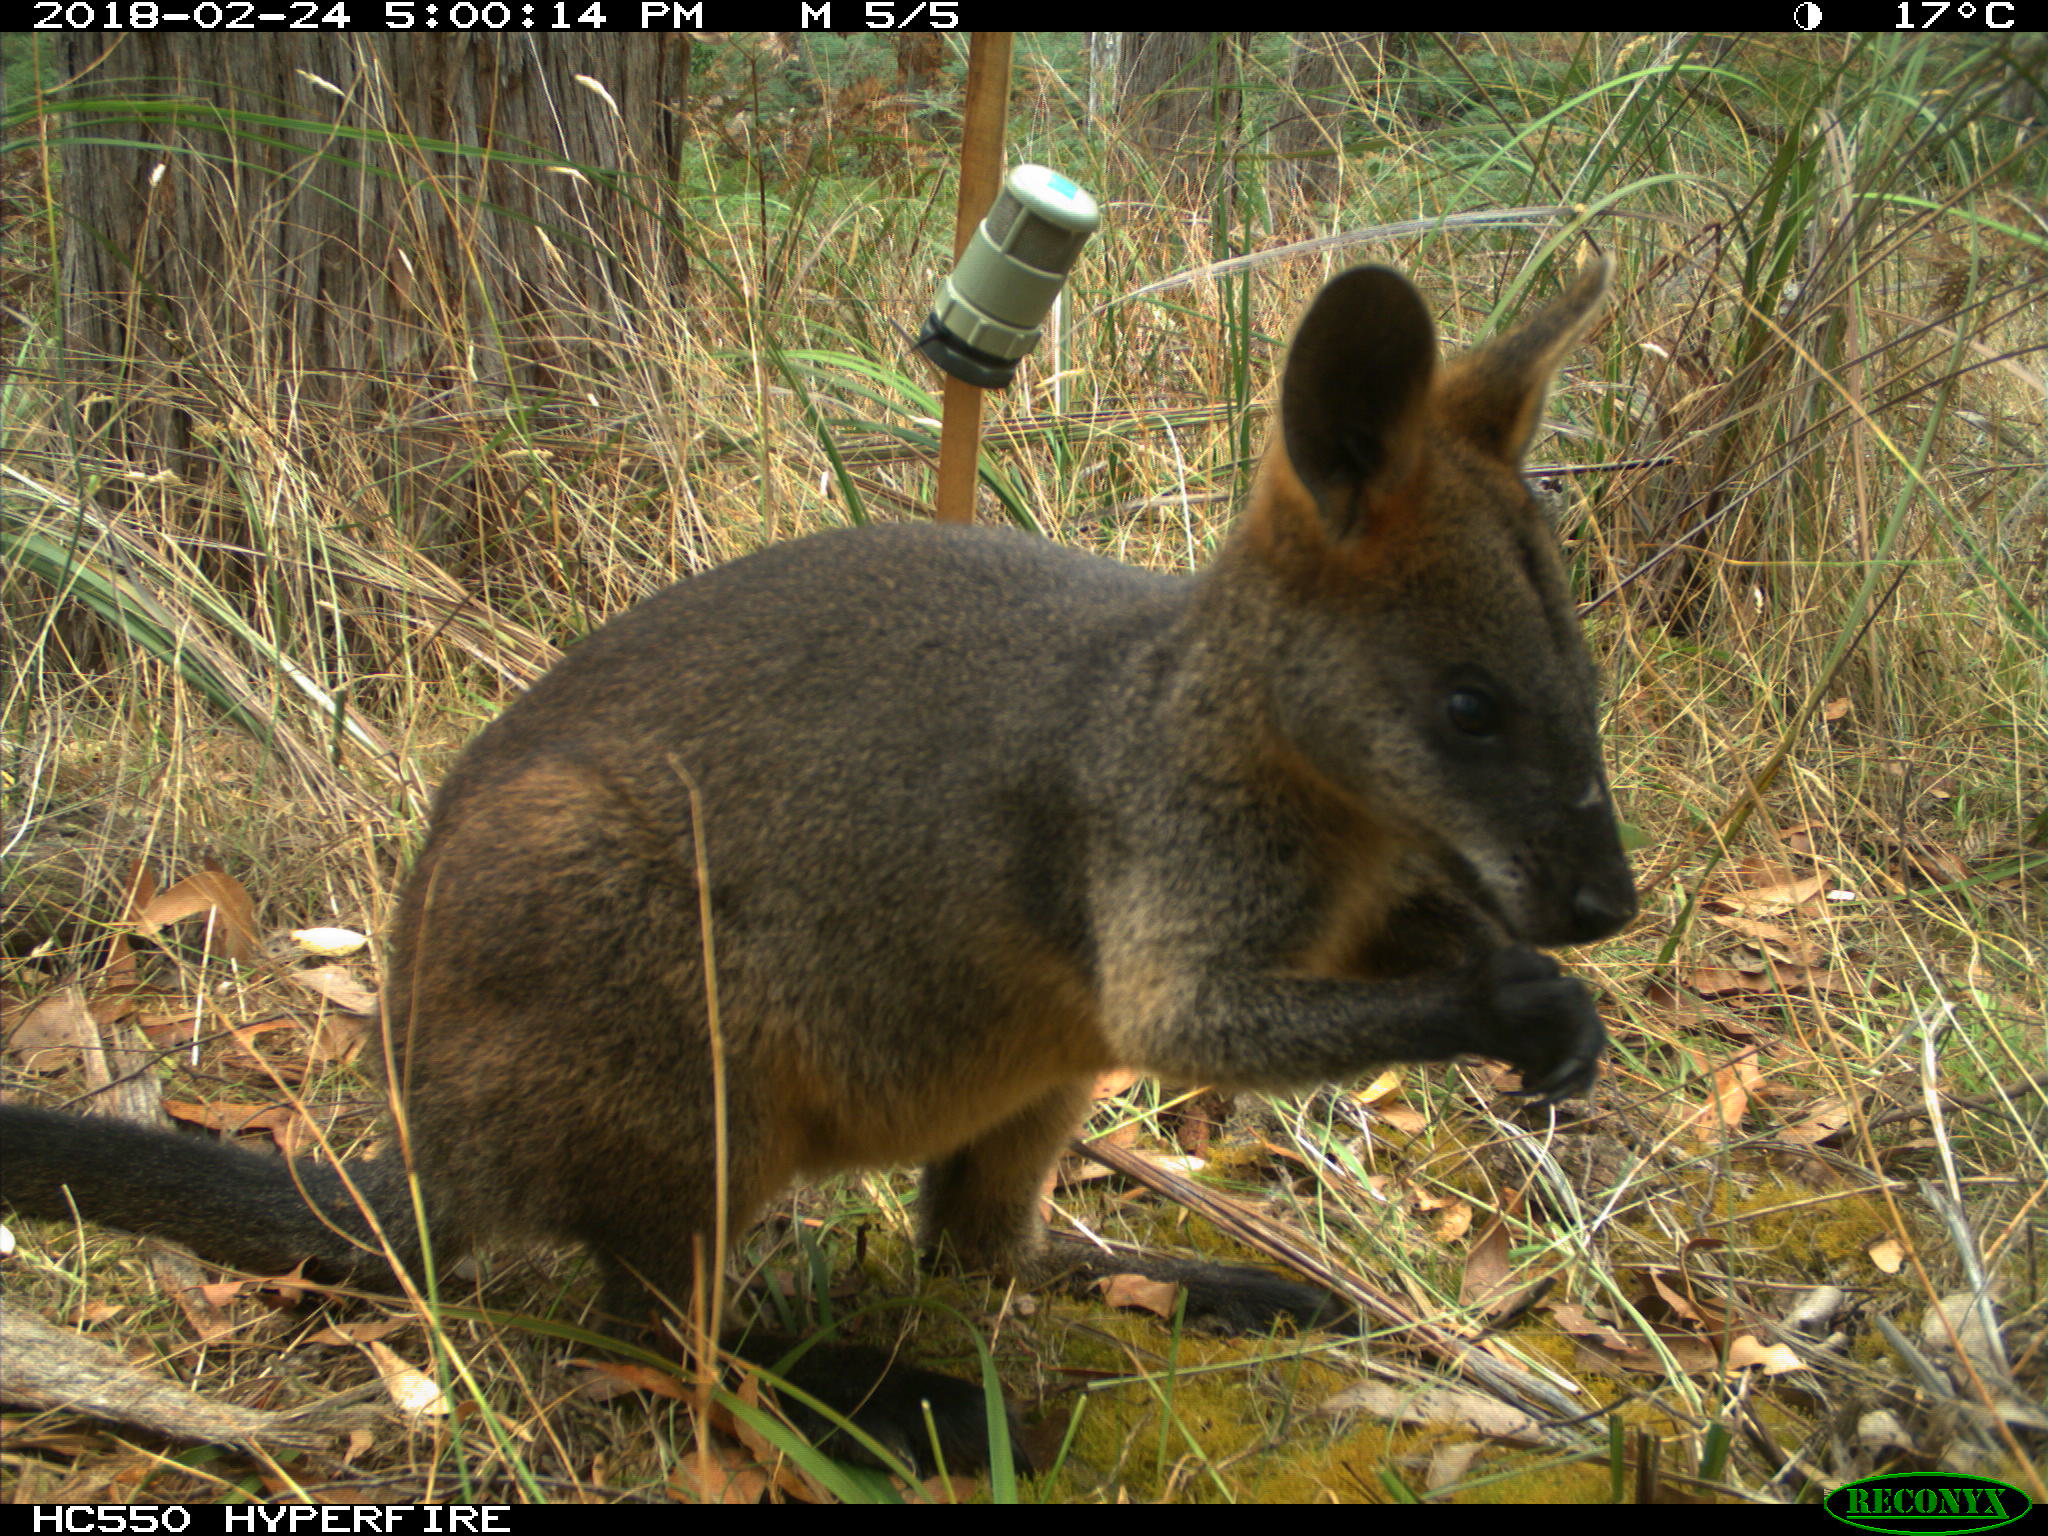 Photo of a Swamp Wallaby taken during the field pilot study for the ecosystem resilience monitoring program